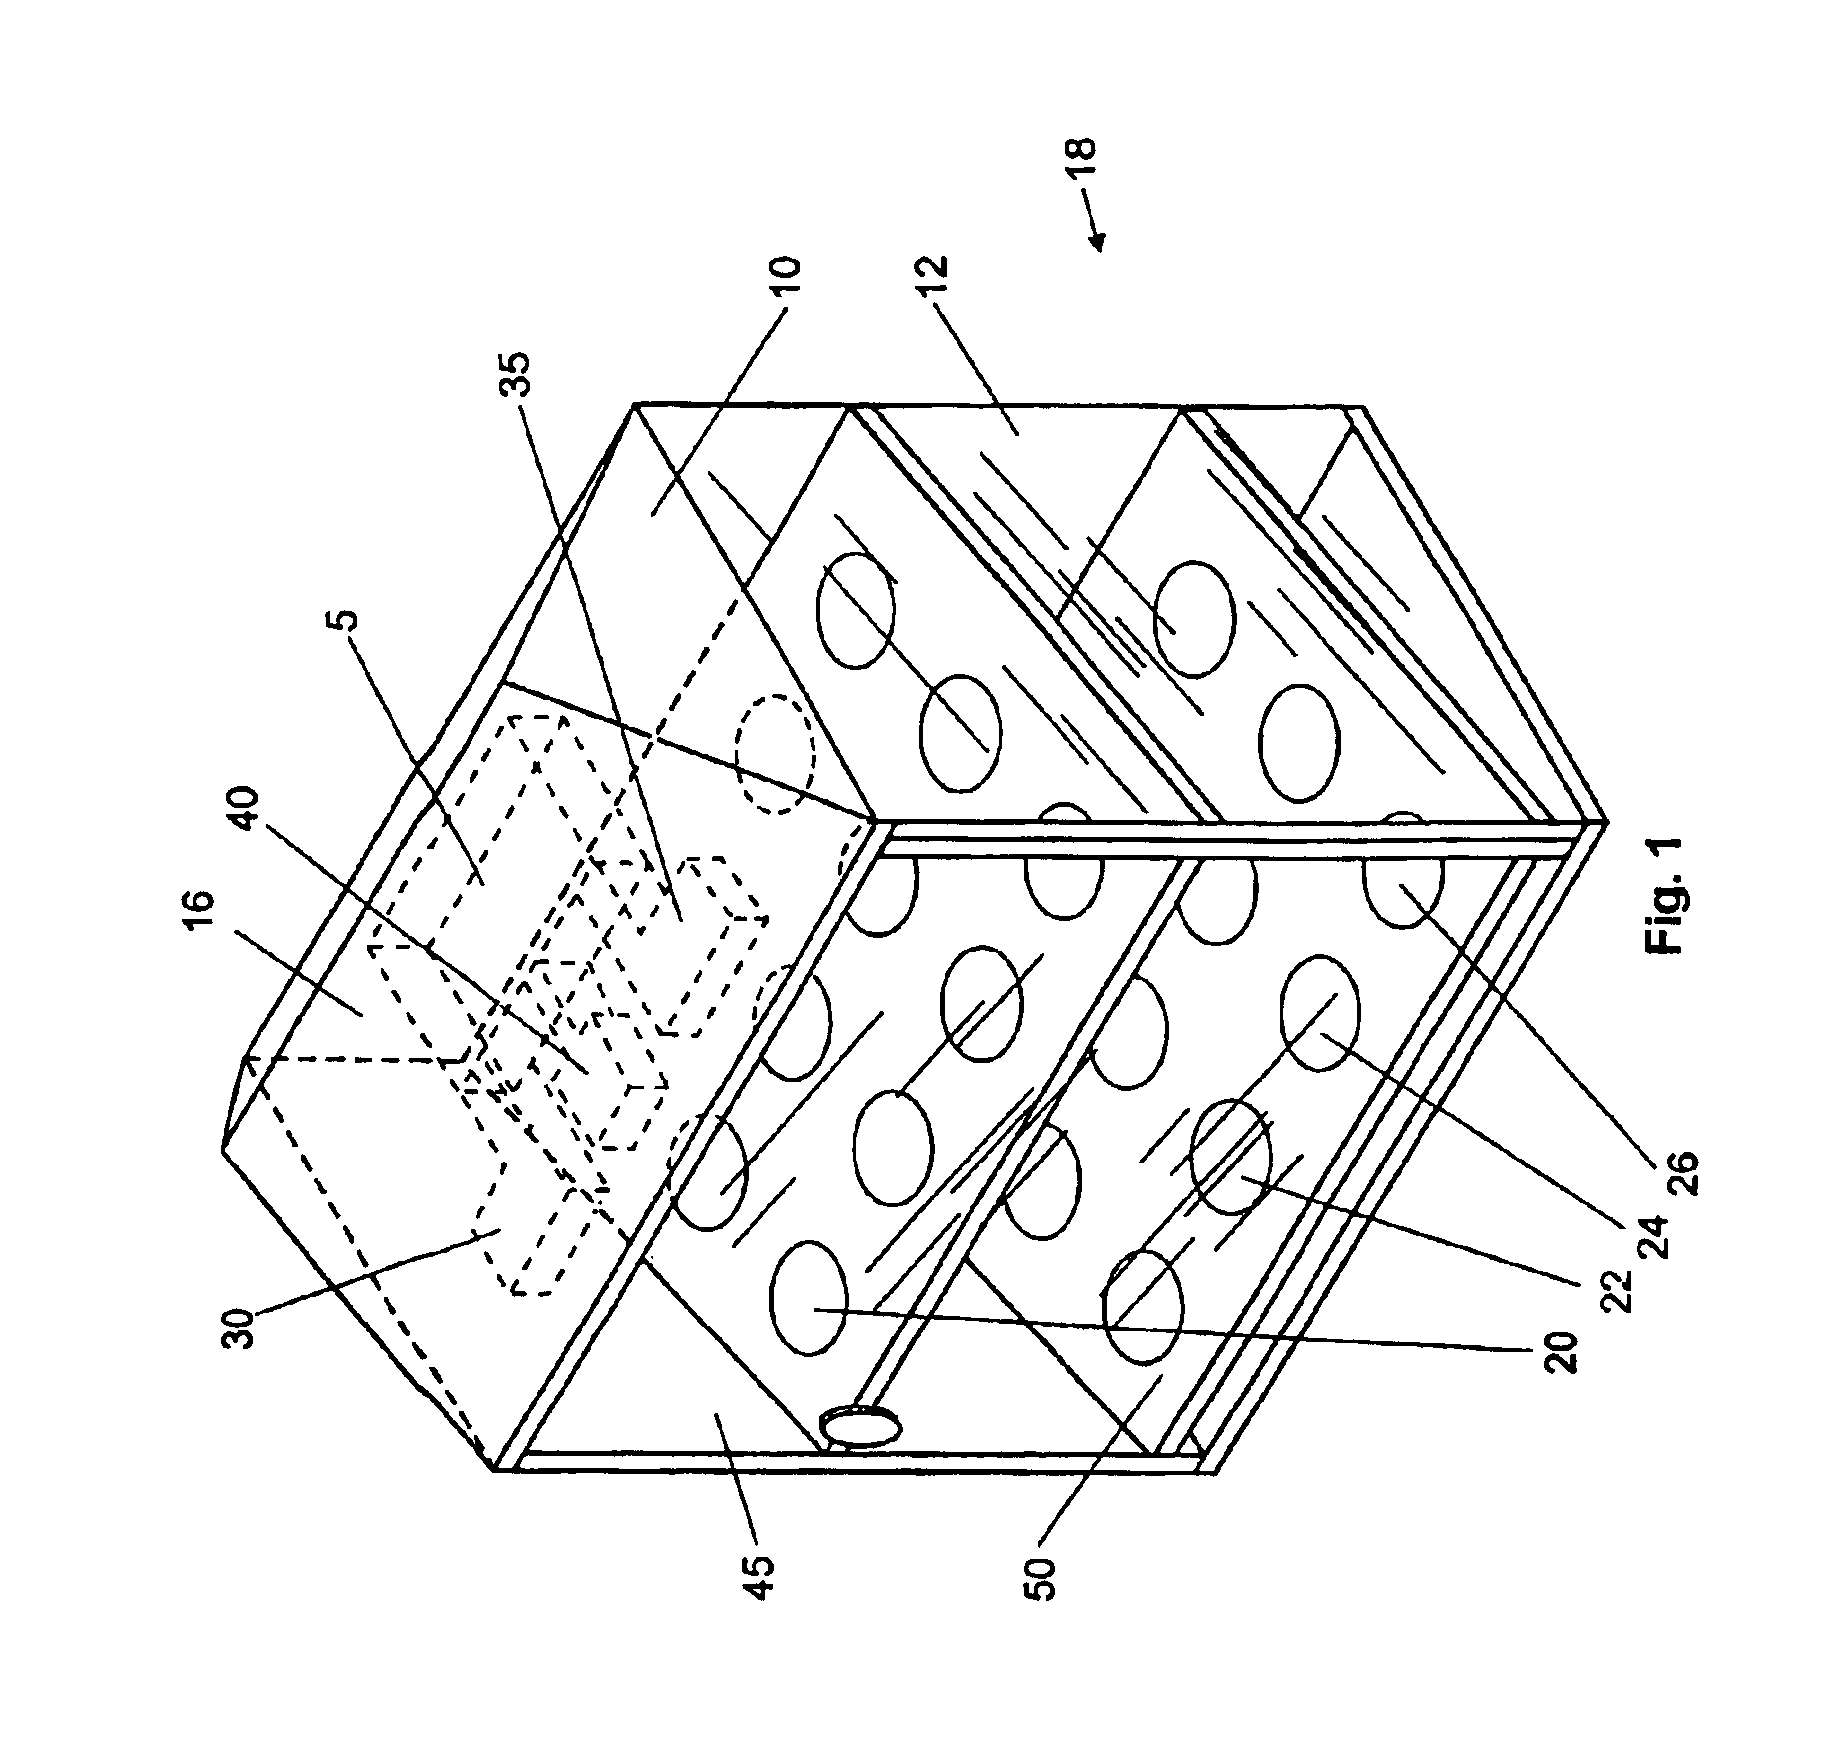 Apparatus for controlling the drying of previously baked goods